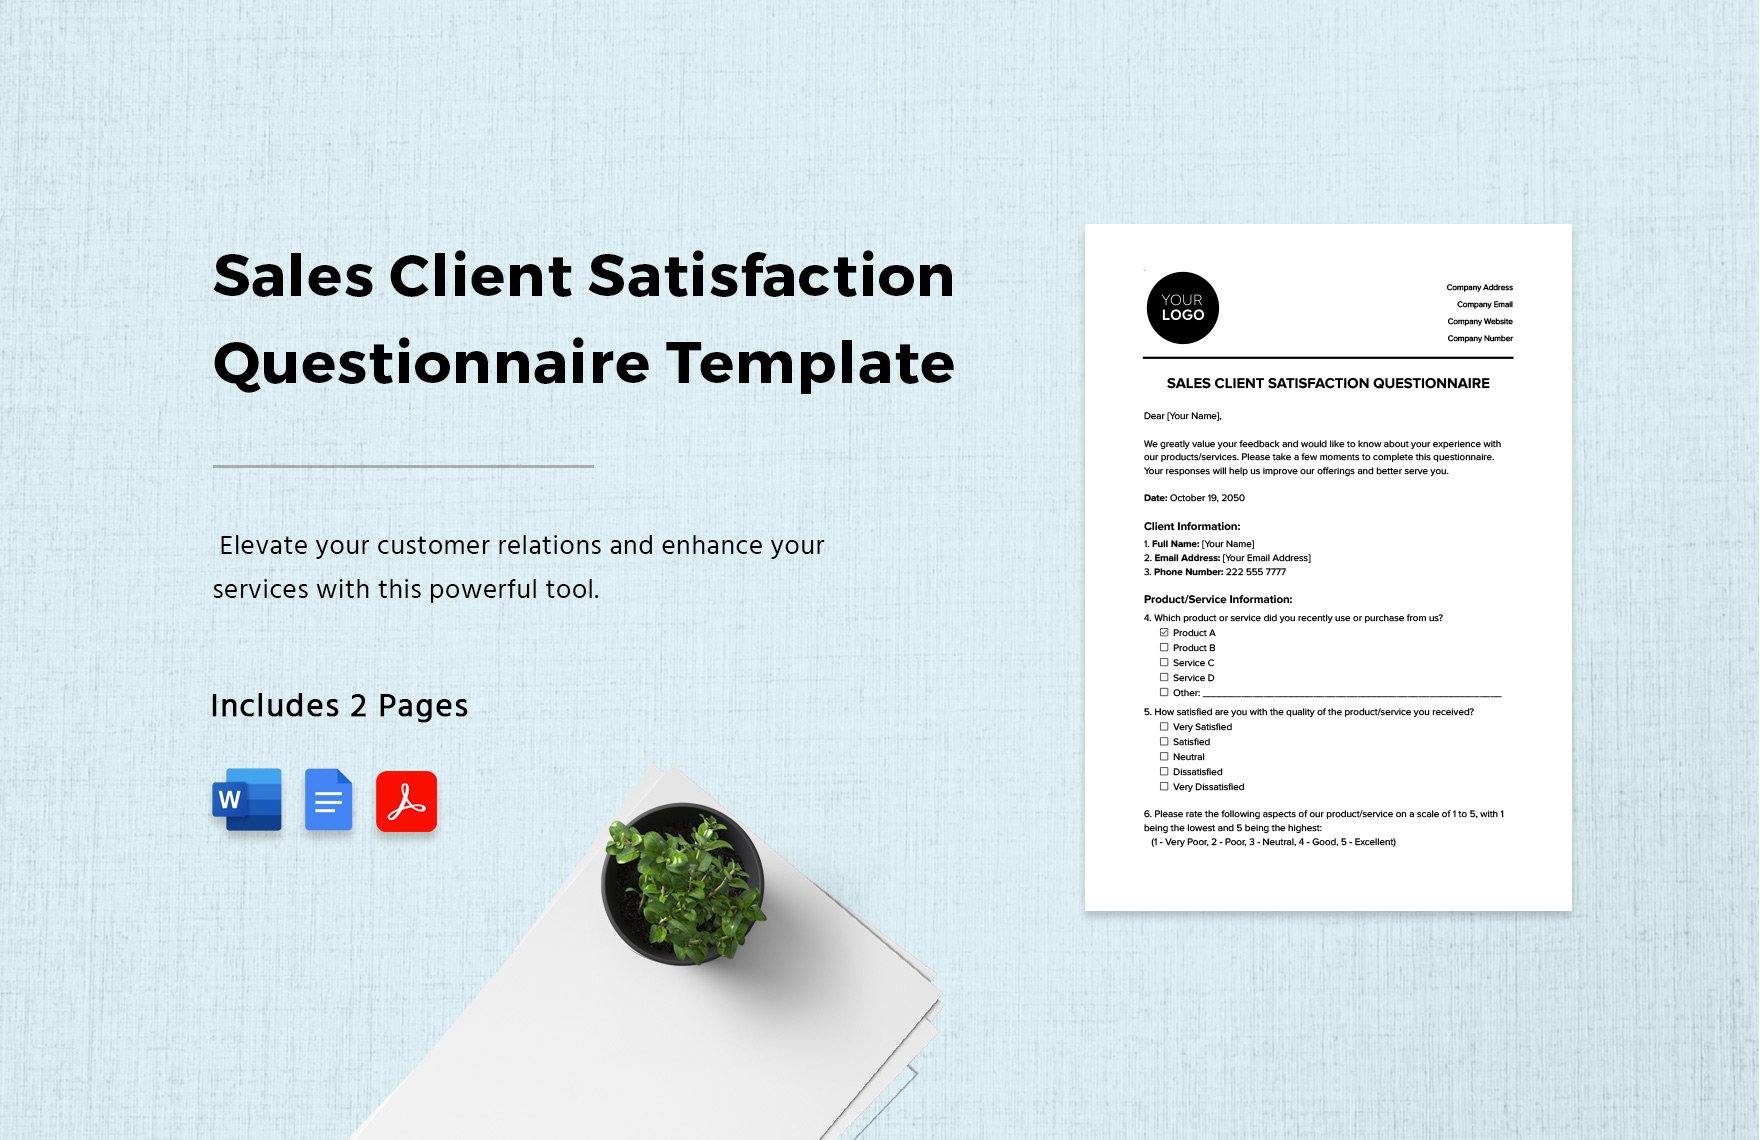 Sales Client Satisfaction Questionnaire Template in Word, Google Docs, PDF